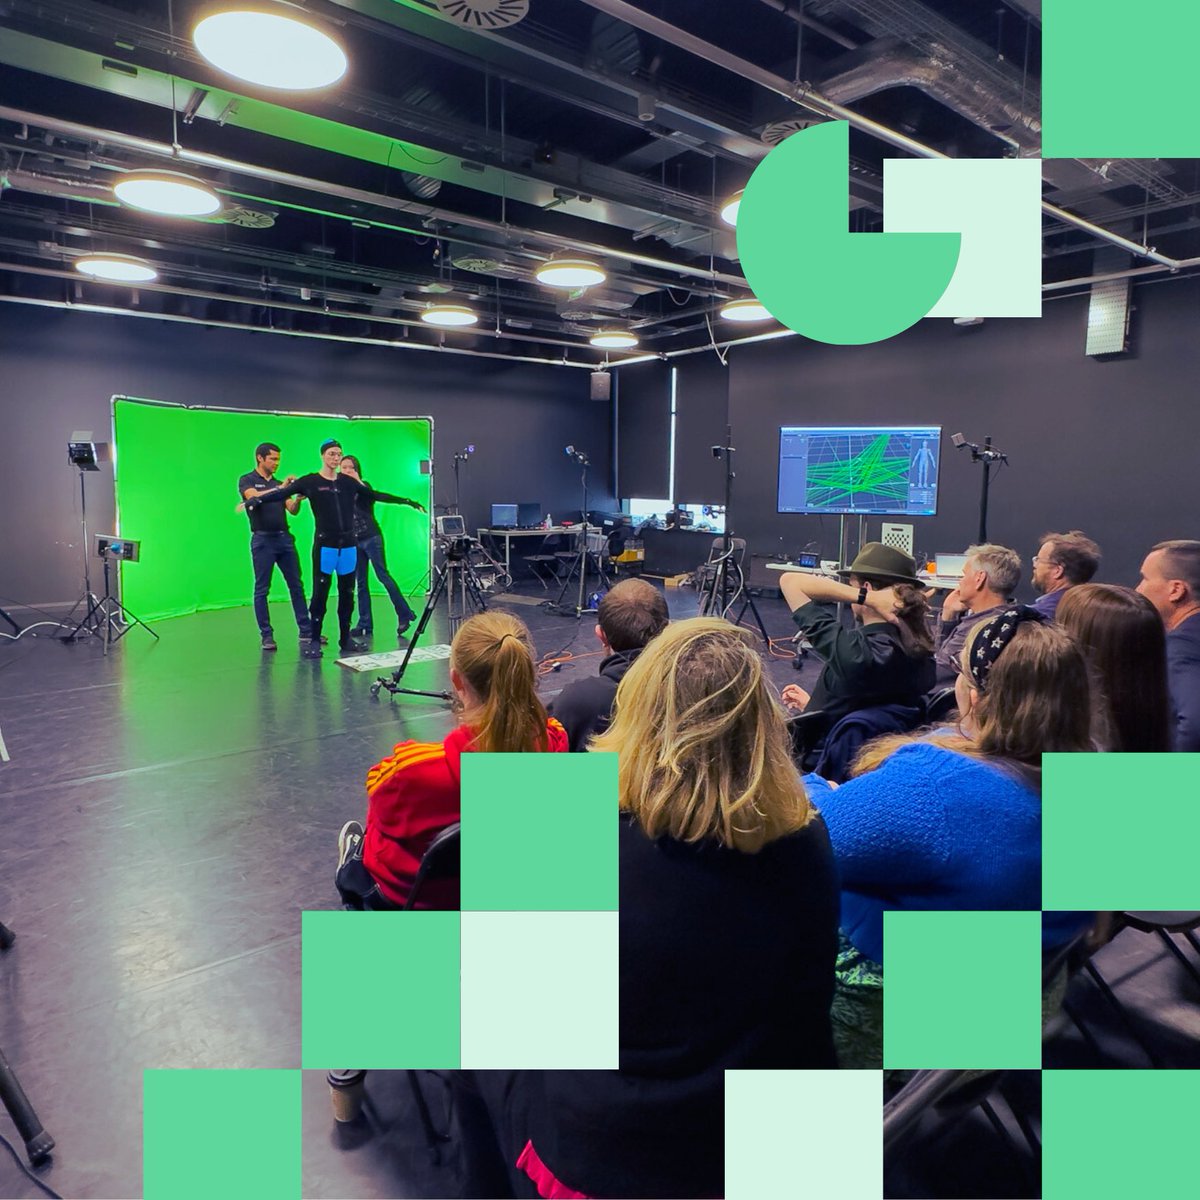 Media Cymru's Development Fund is now LIVE. Apply for up to £50,000 to research and develop an innovation-driven project that will directly benefit the media sector in Wales: bit.ly/DVFUNDENG #MediaCymru